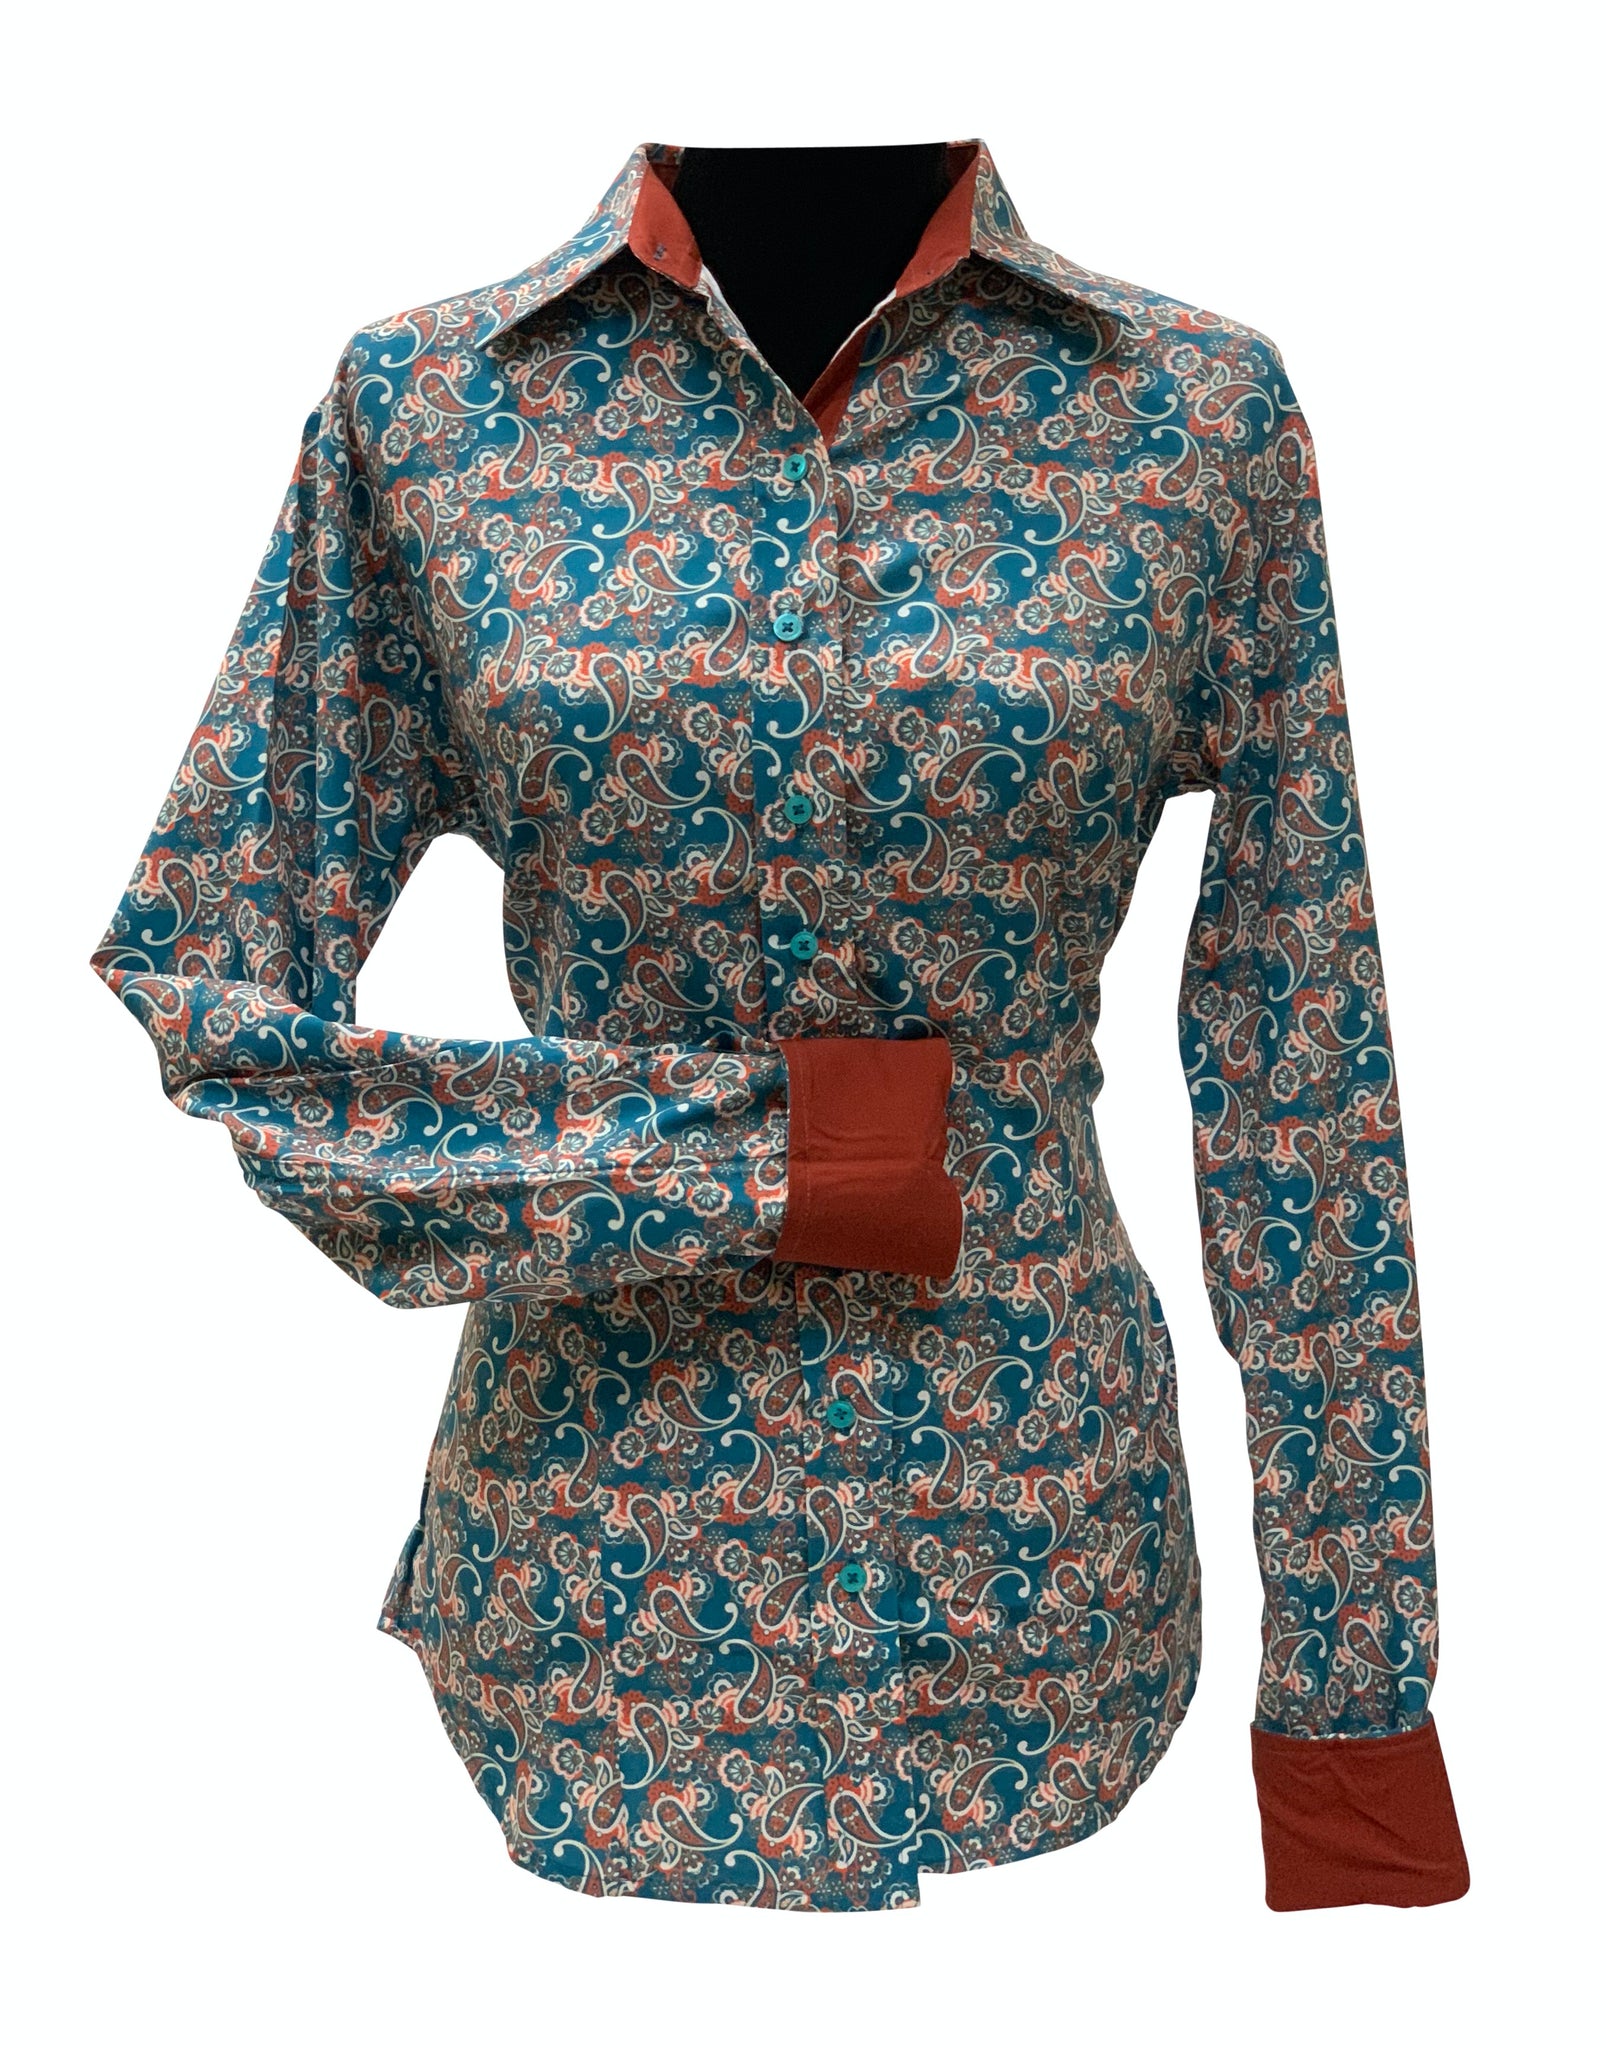 A Printed Fitted Button Down - Turquoise/Rust Paisley